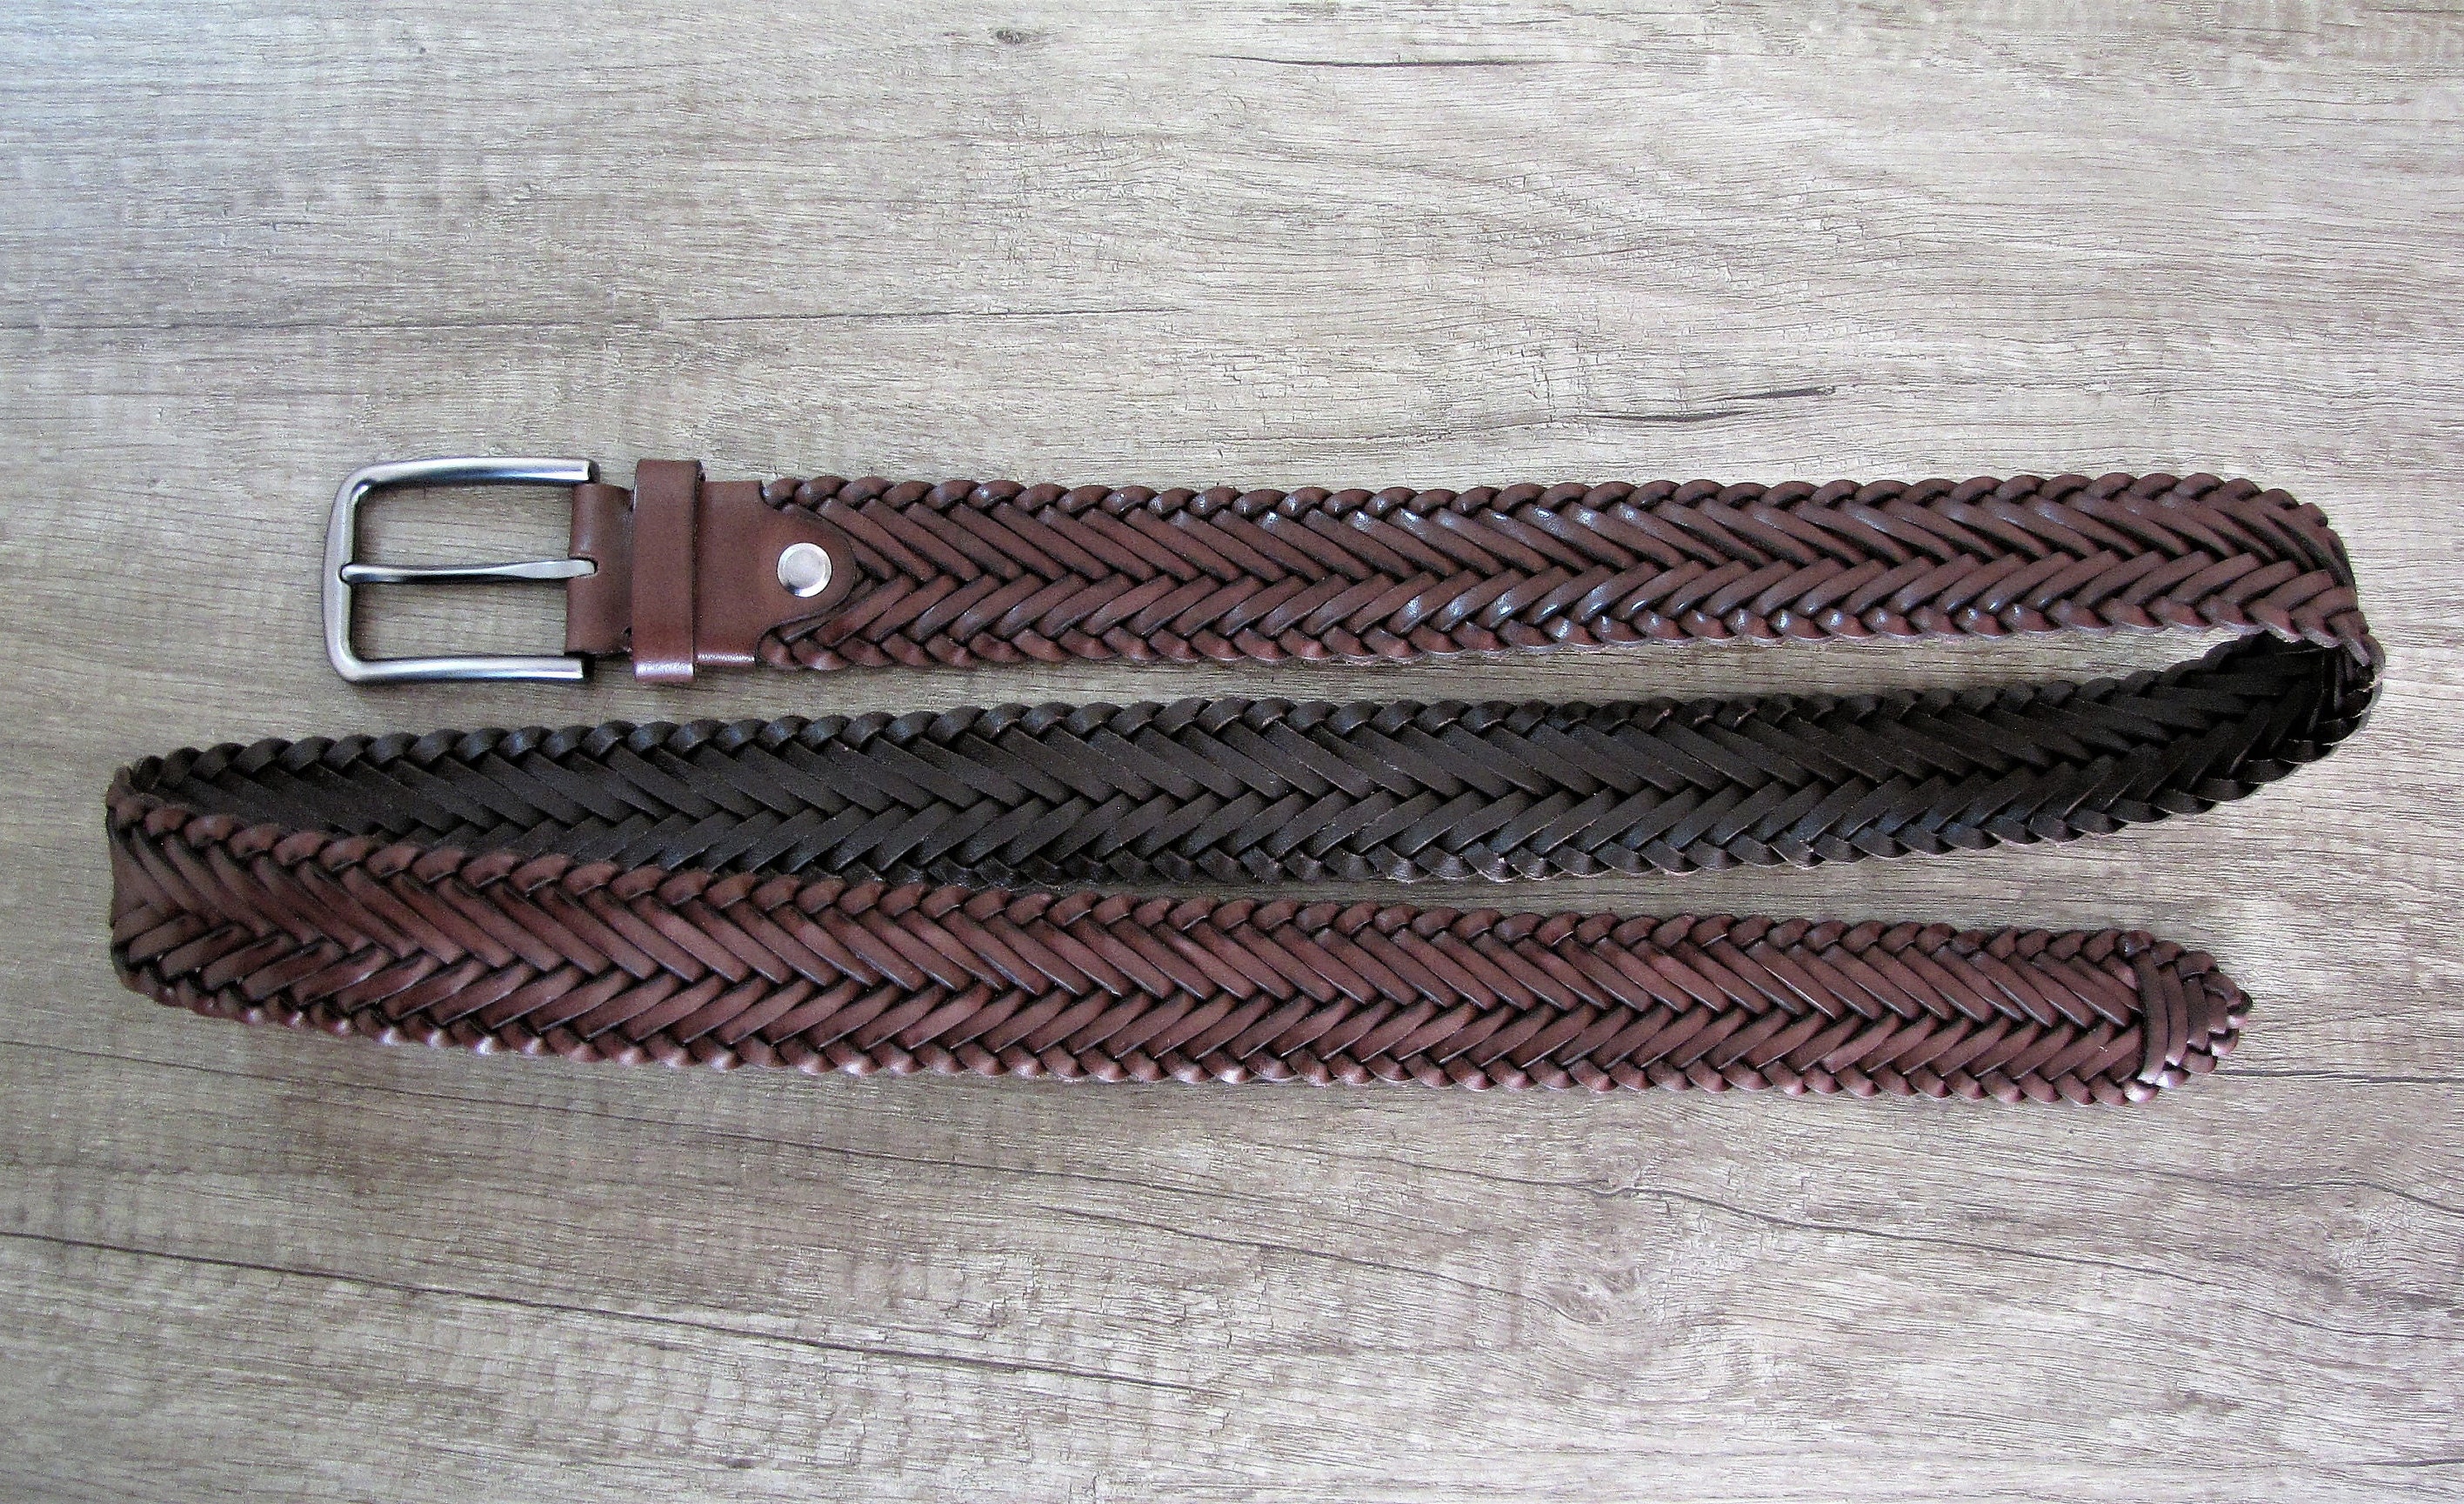 Hand Braid Leather Belt Braided Belt Handcrafted for Casual | Etsy